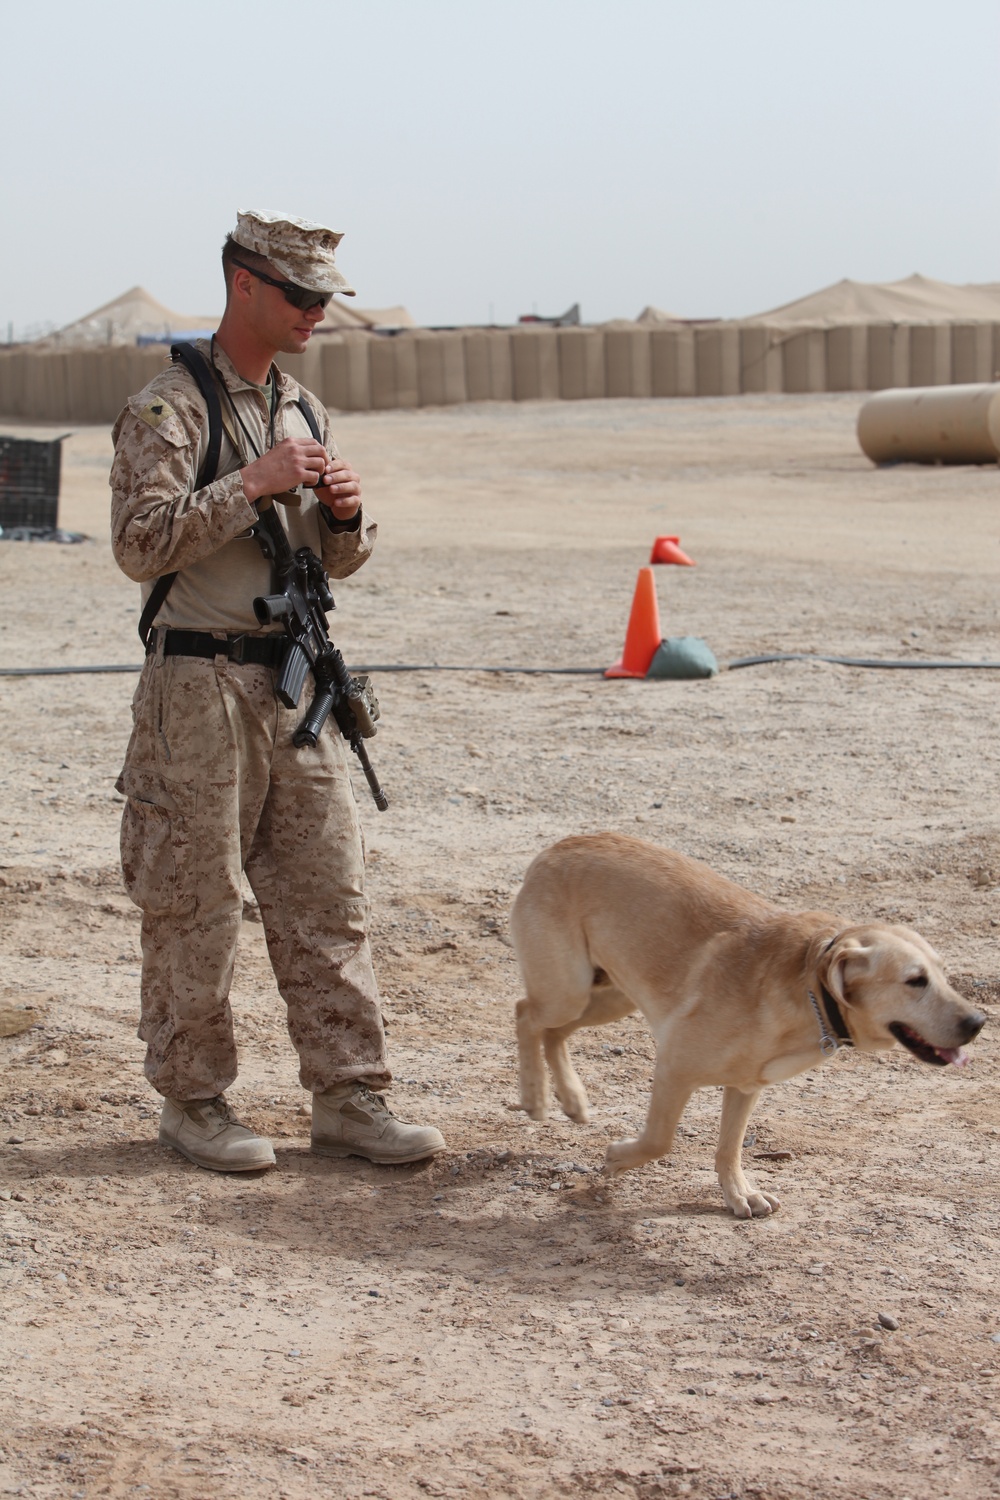 Dog handlers train canines, save Marine lives in Afghanistan